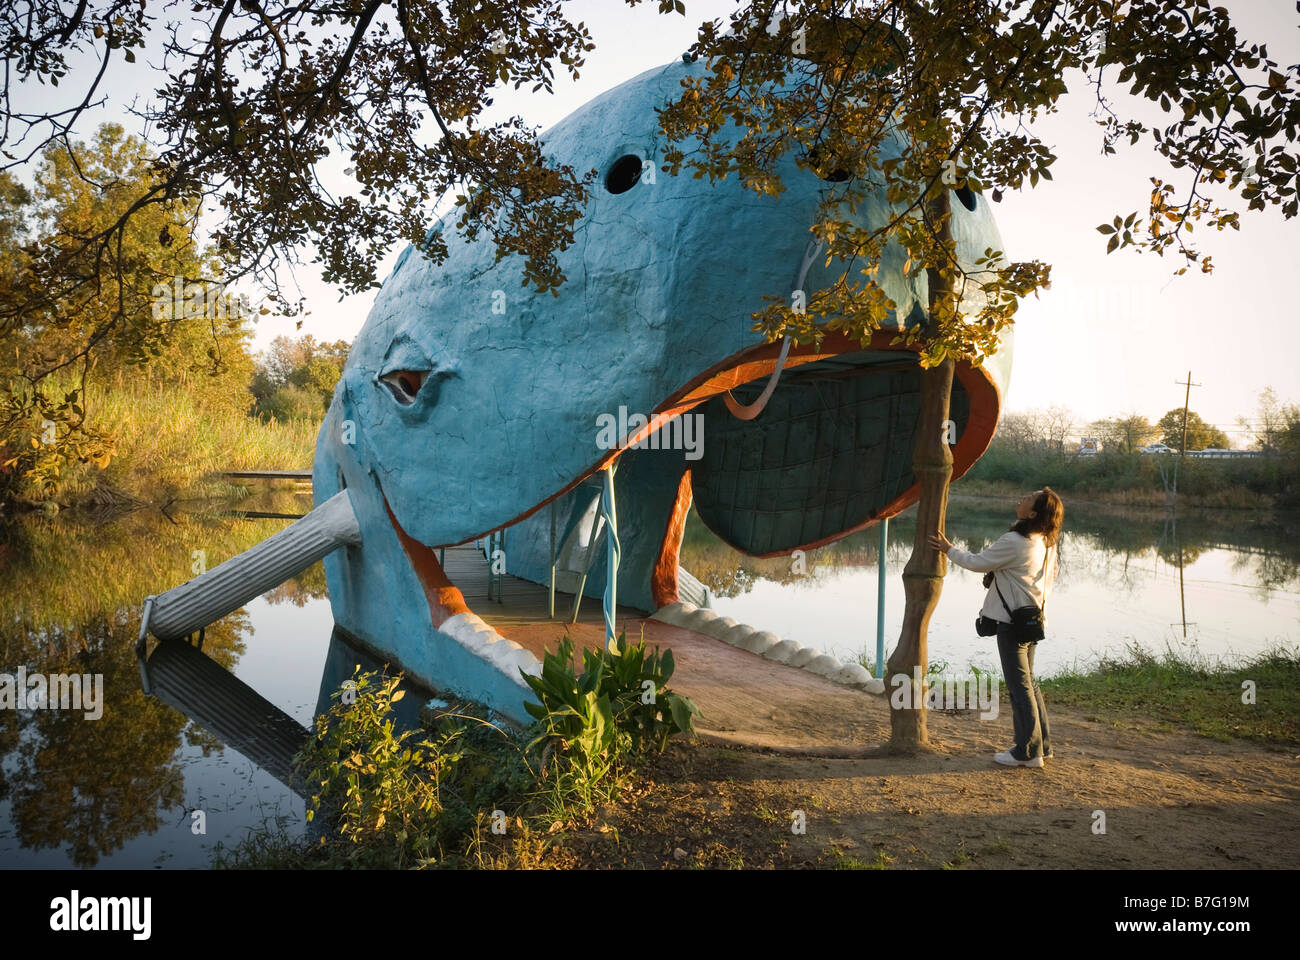 The Blue Whale roadside attraction on Route 66 in Oklahoma, USA. Stock Photo